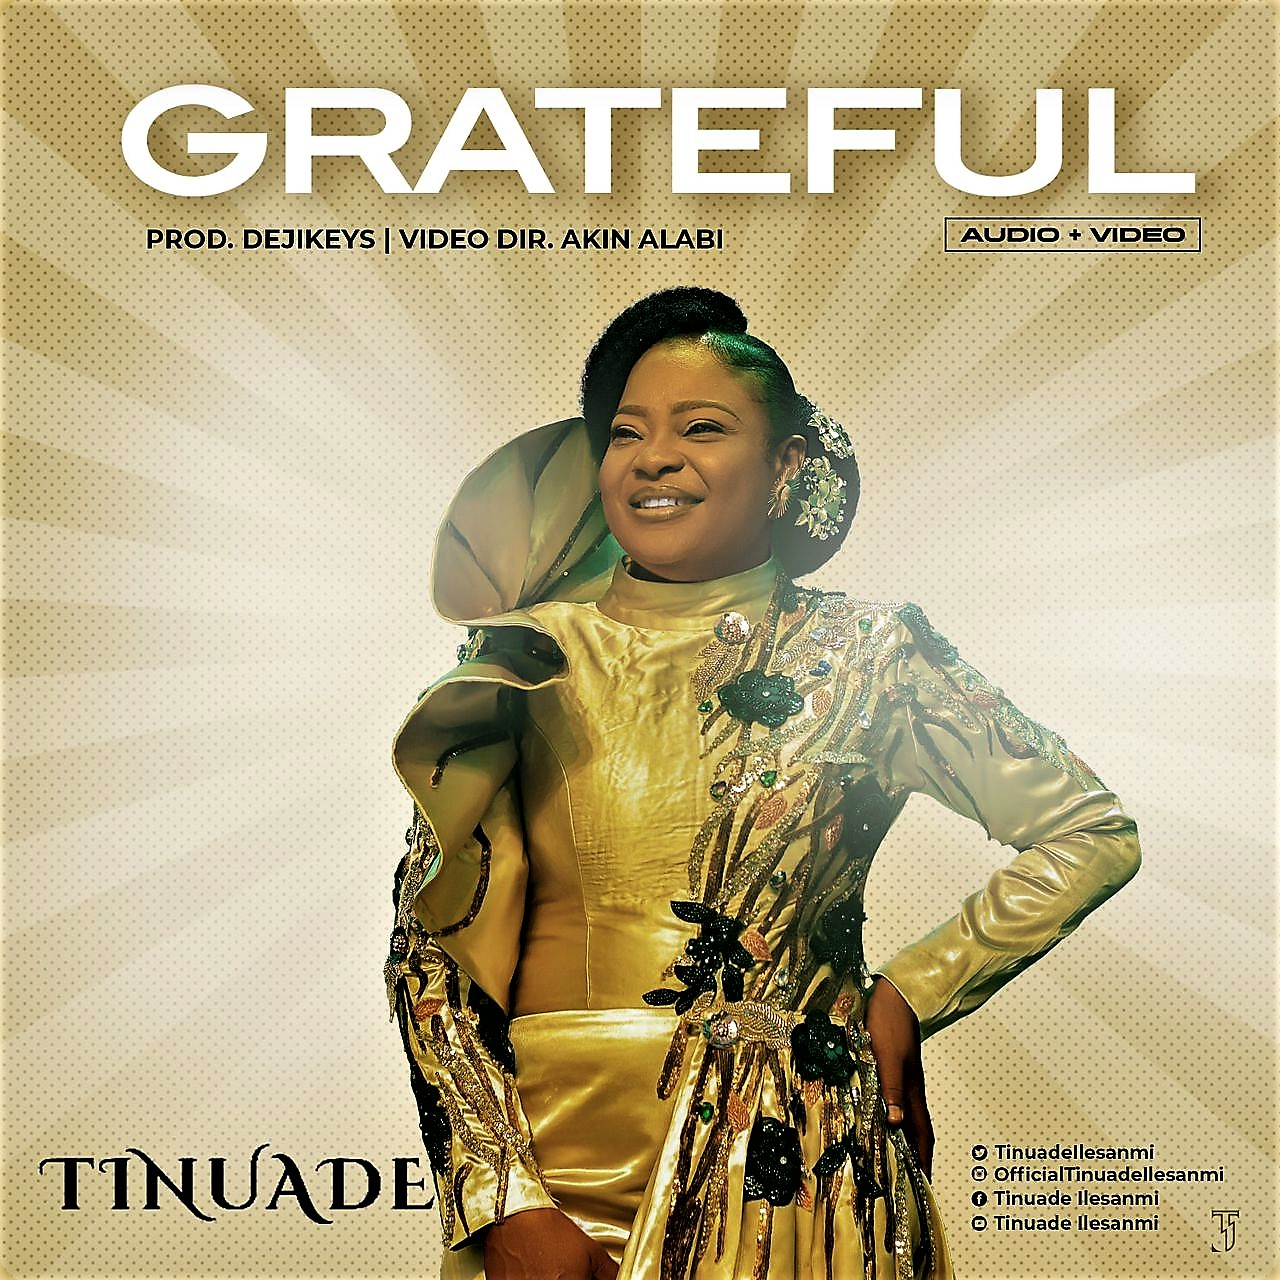 Grateful by Tinuade